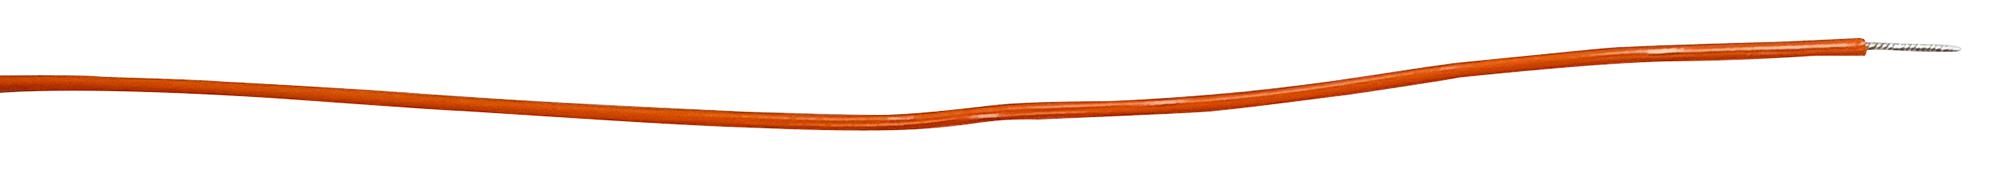 PP002588 CABLE WIRE, 22AWG, ORANGE, 305M PRO POWER